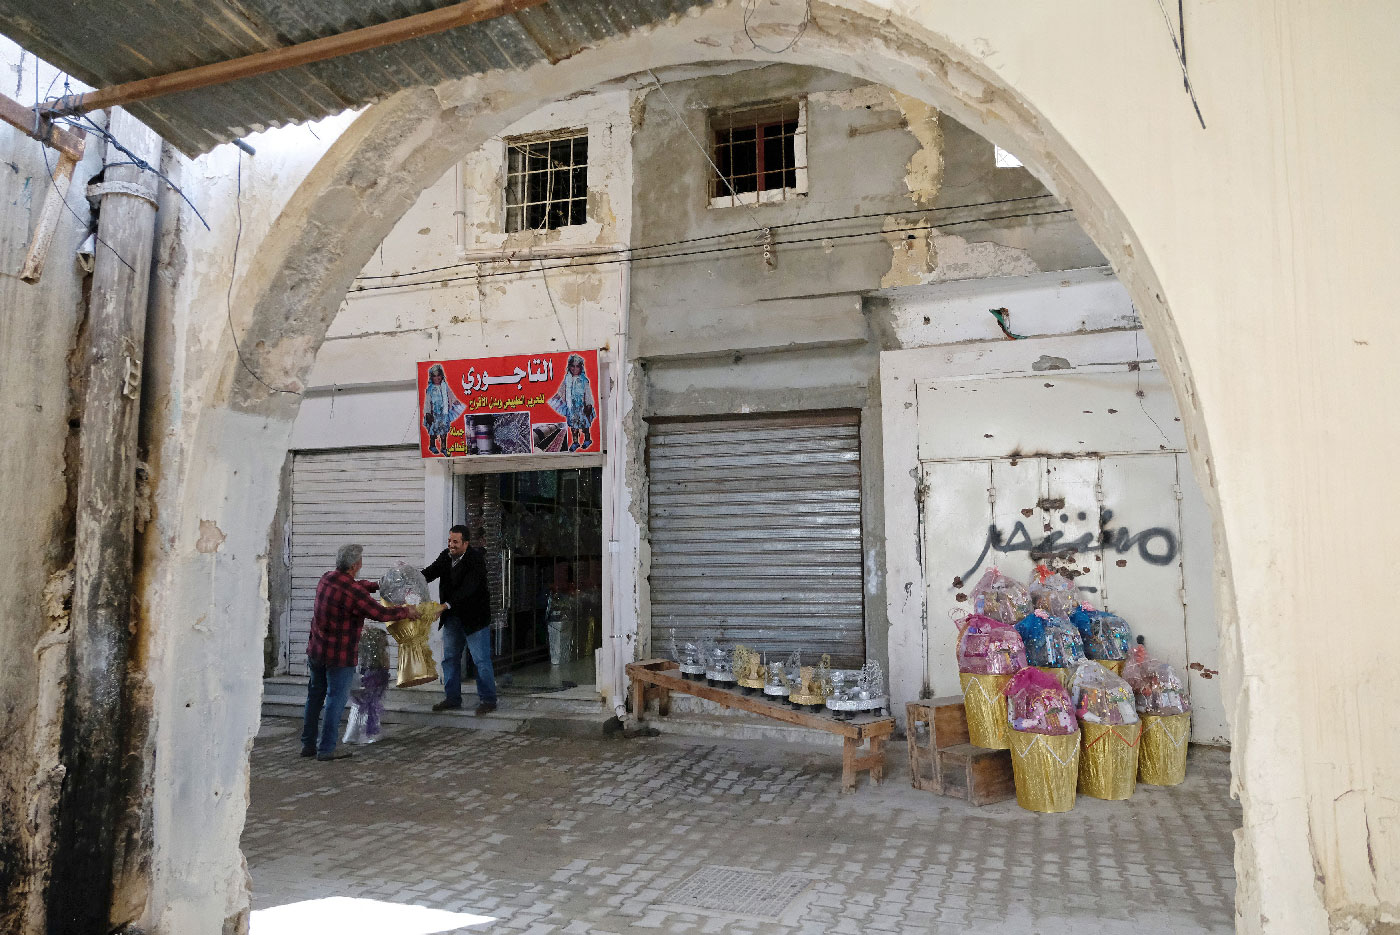 A shopkeeper sells traditional goods at the old popular market known as the Souk al-Jureid, which was destroyed during the war, in Benghazi, Libya February 7, 2019.